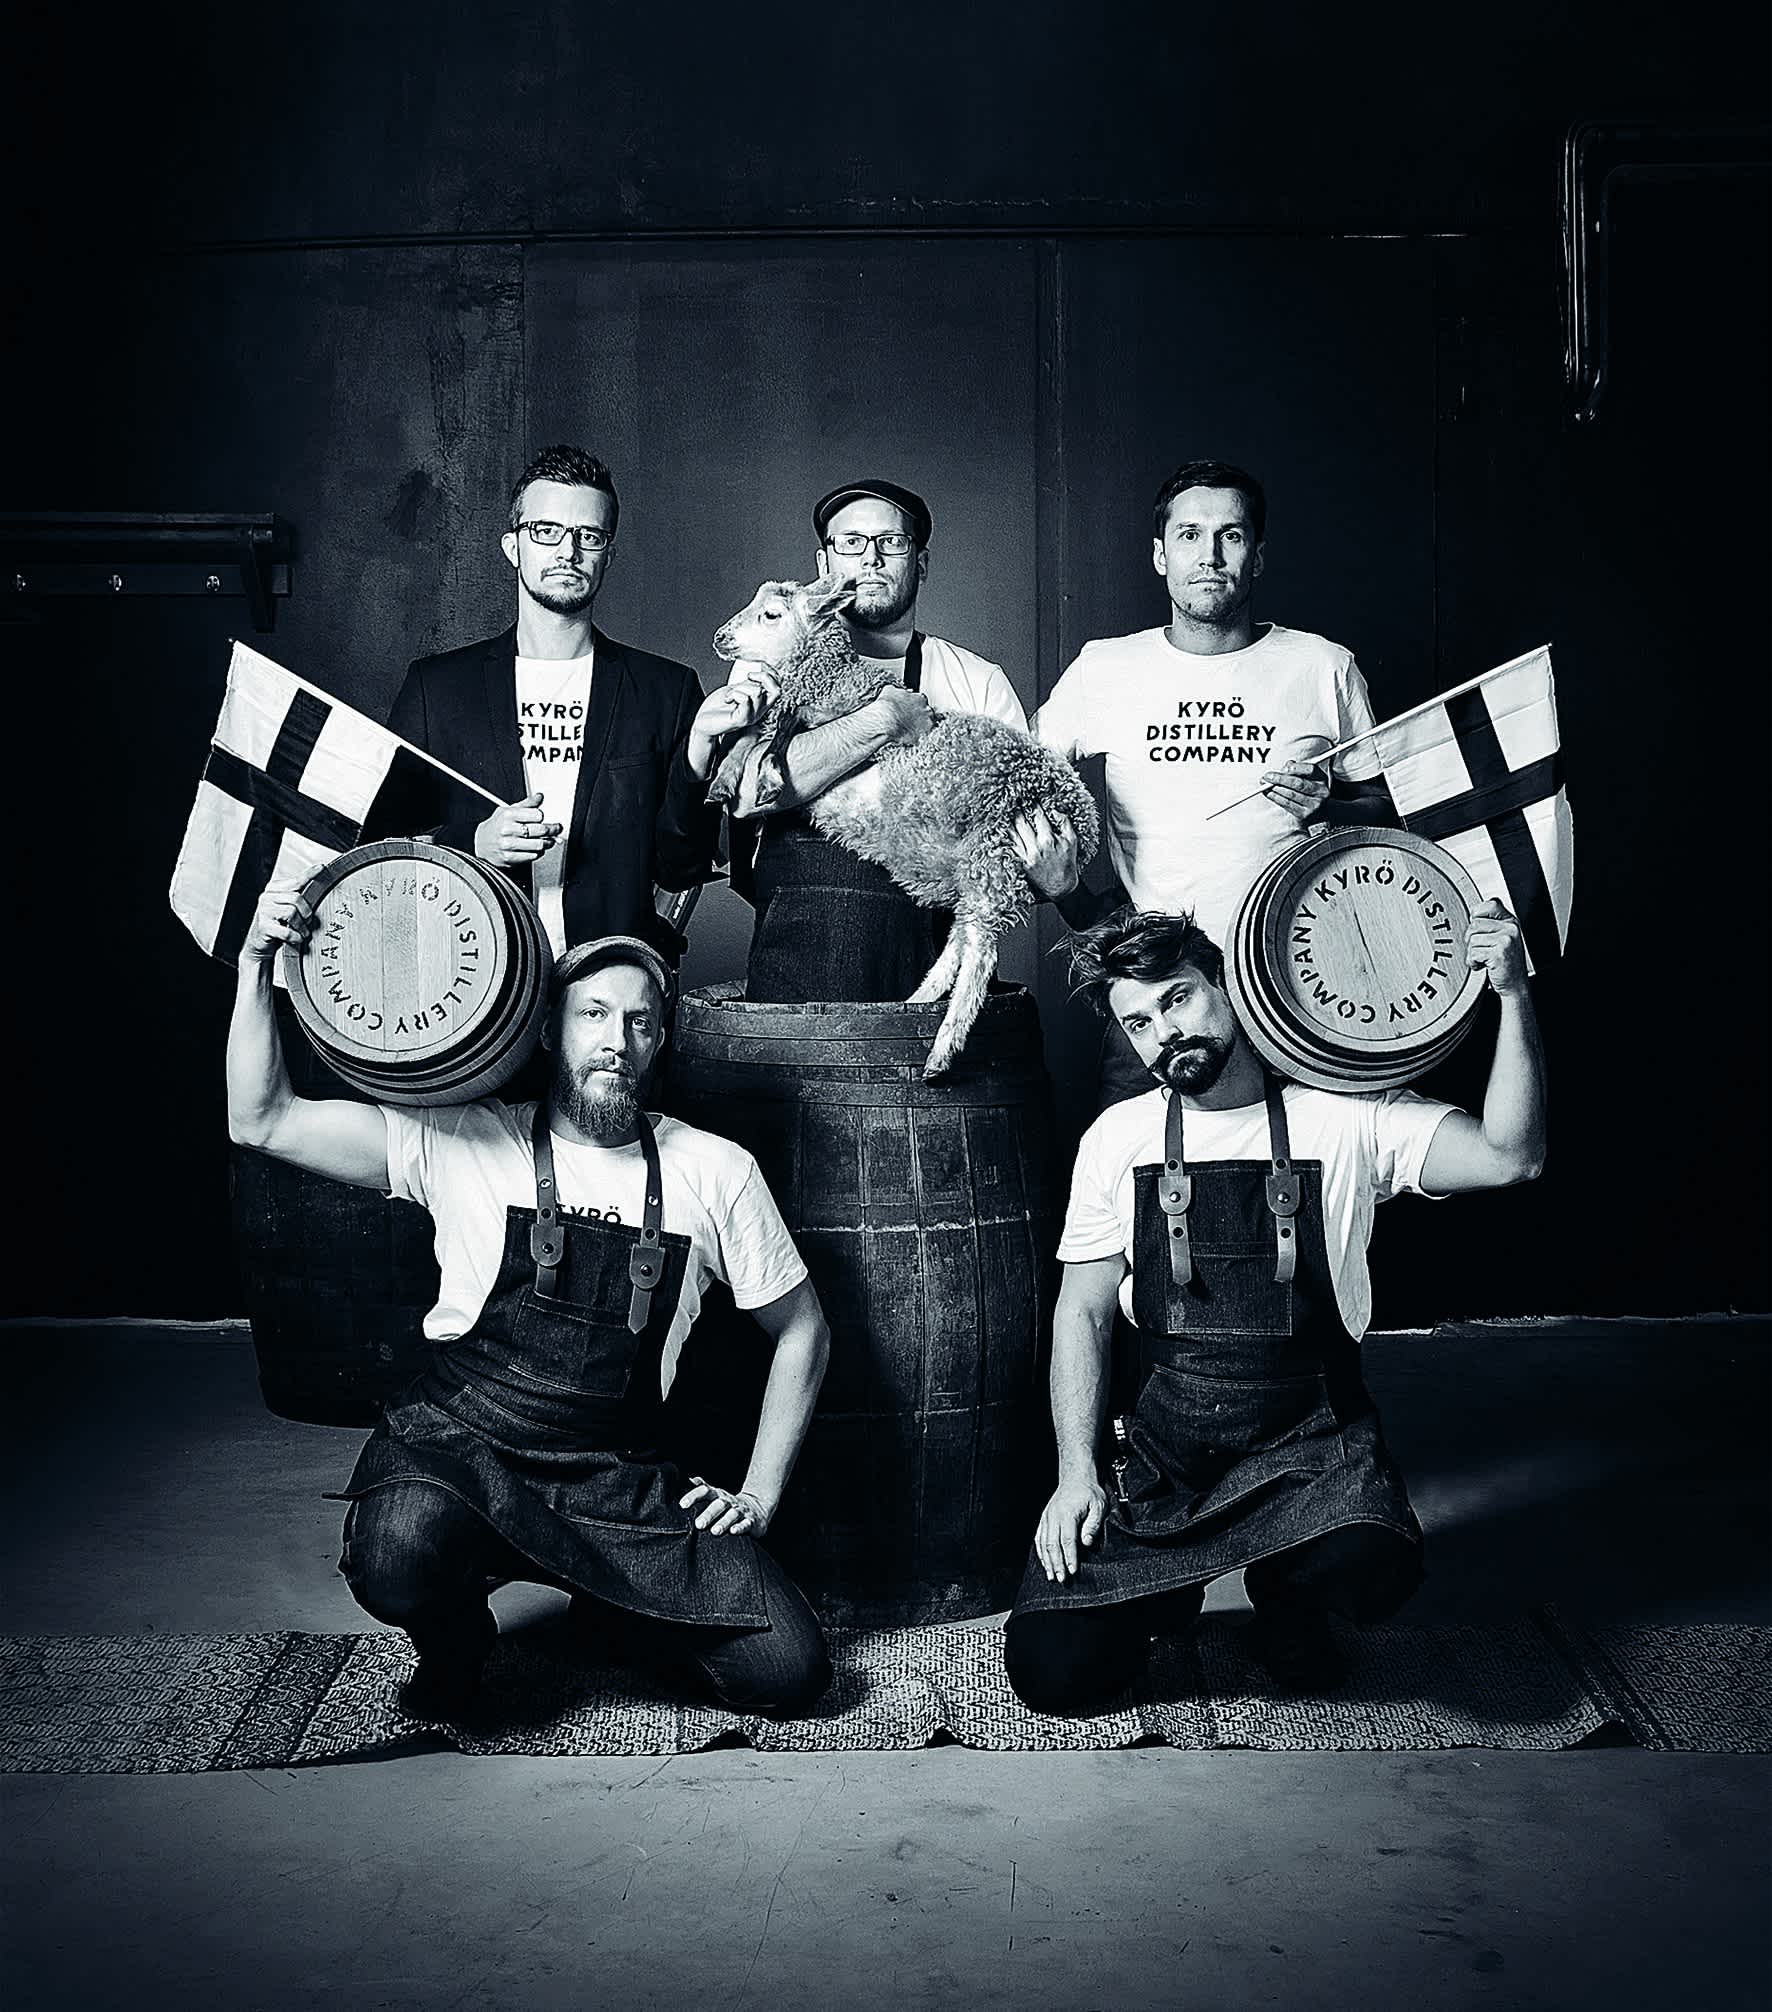 Black and white image: the five founders of the Kyrö Distillery Company in a group picture, two holding barrels, two holding Finnish flags, one holding a lamb. 